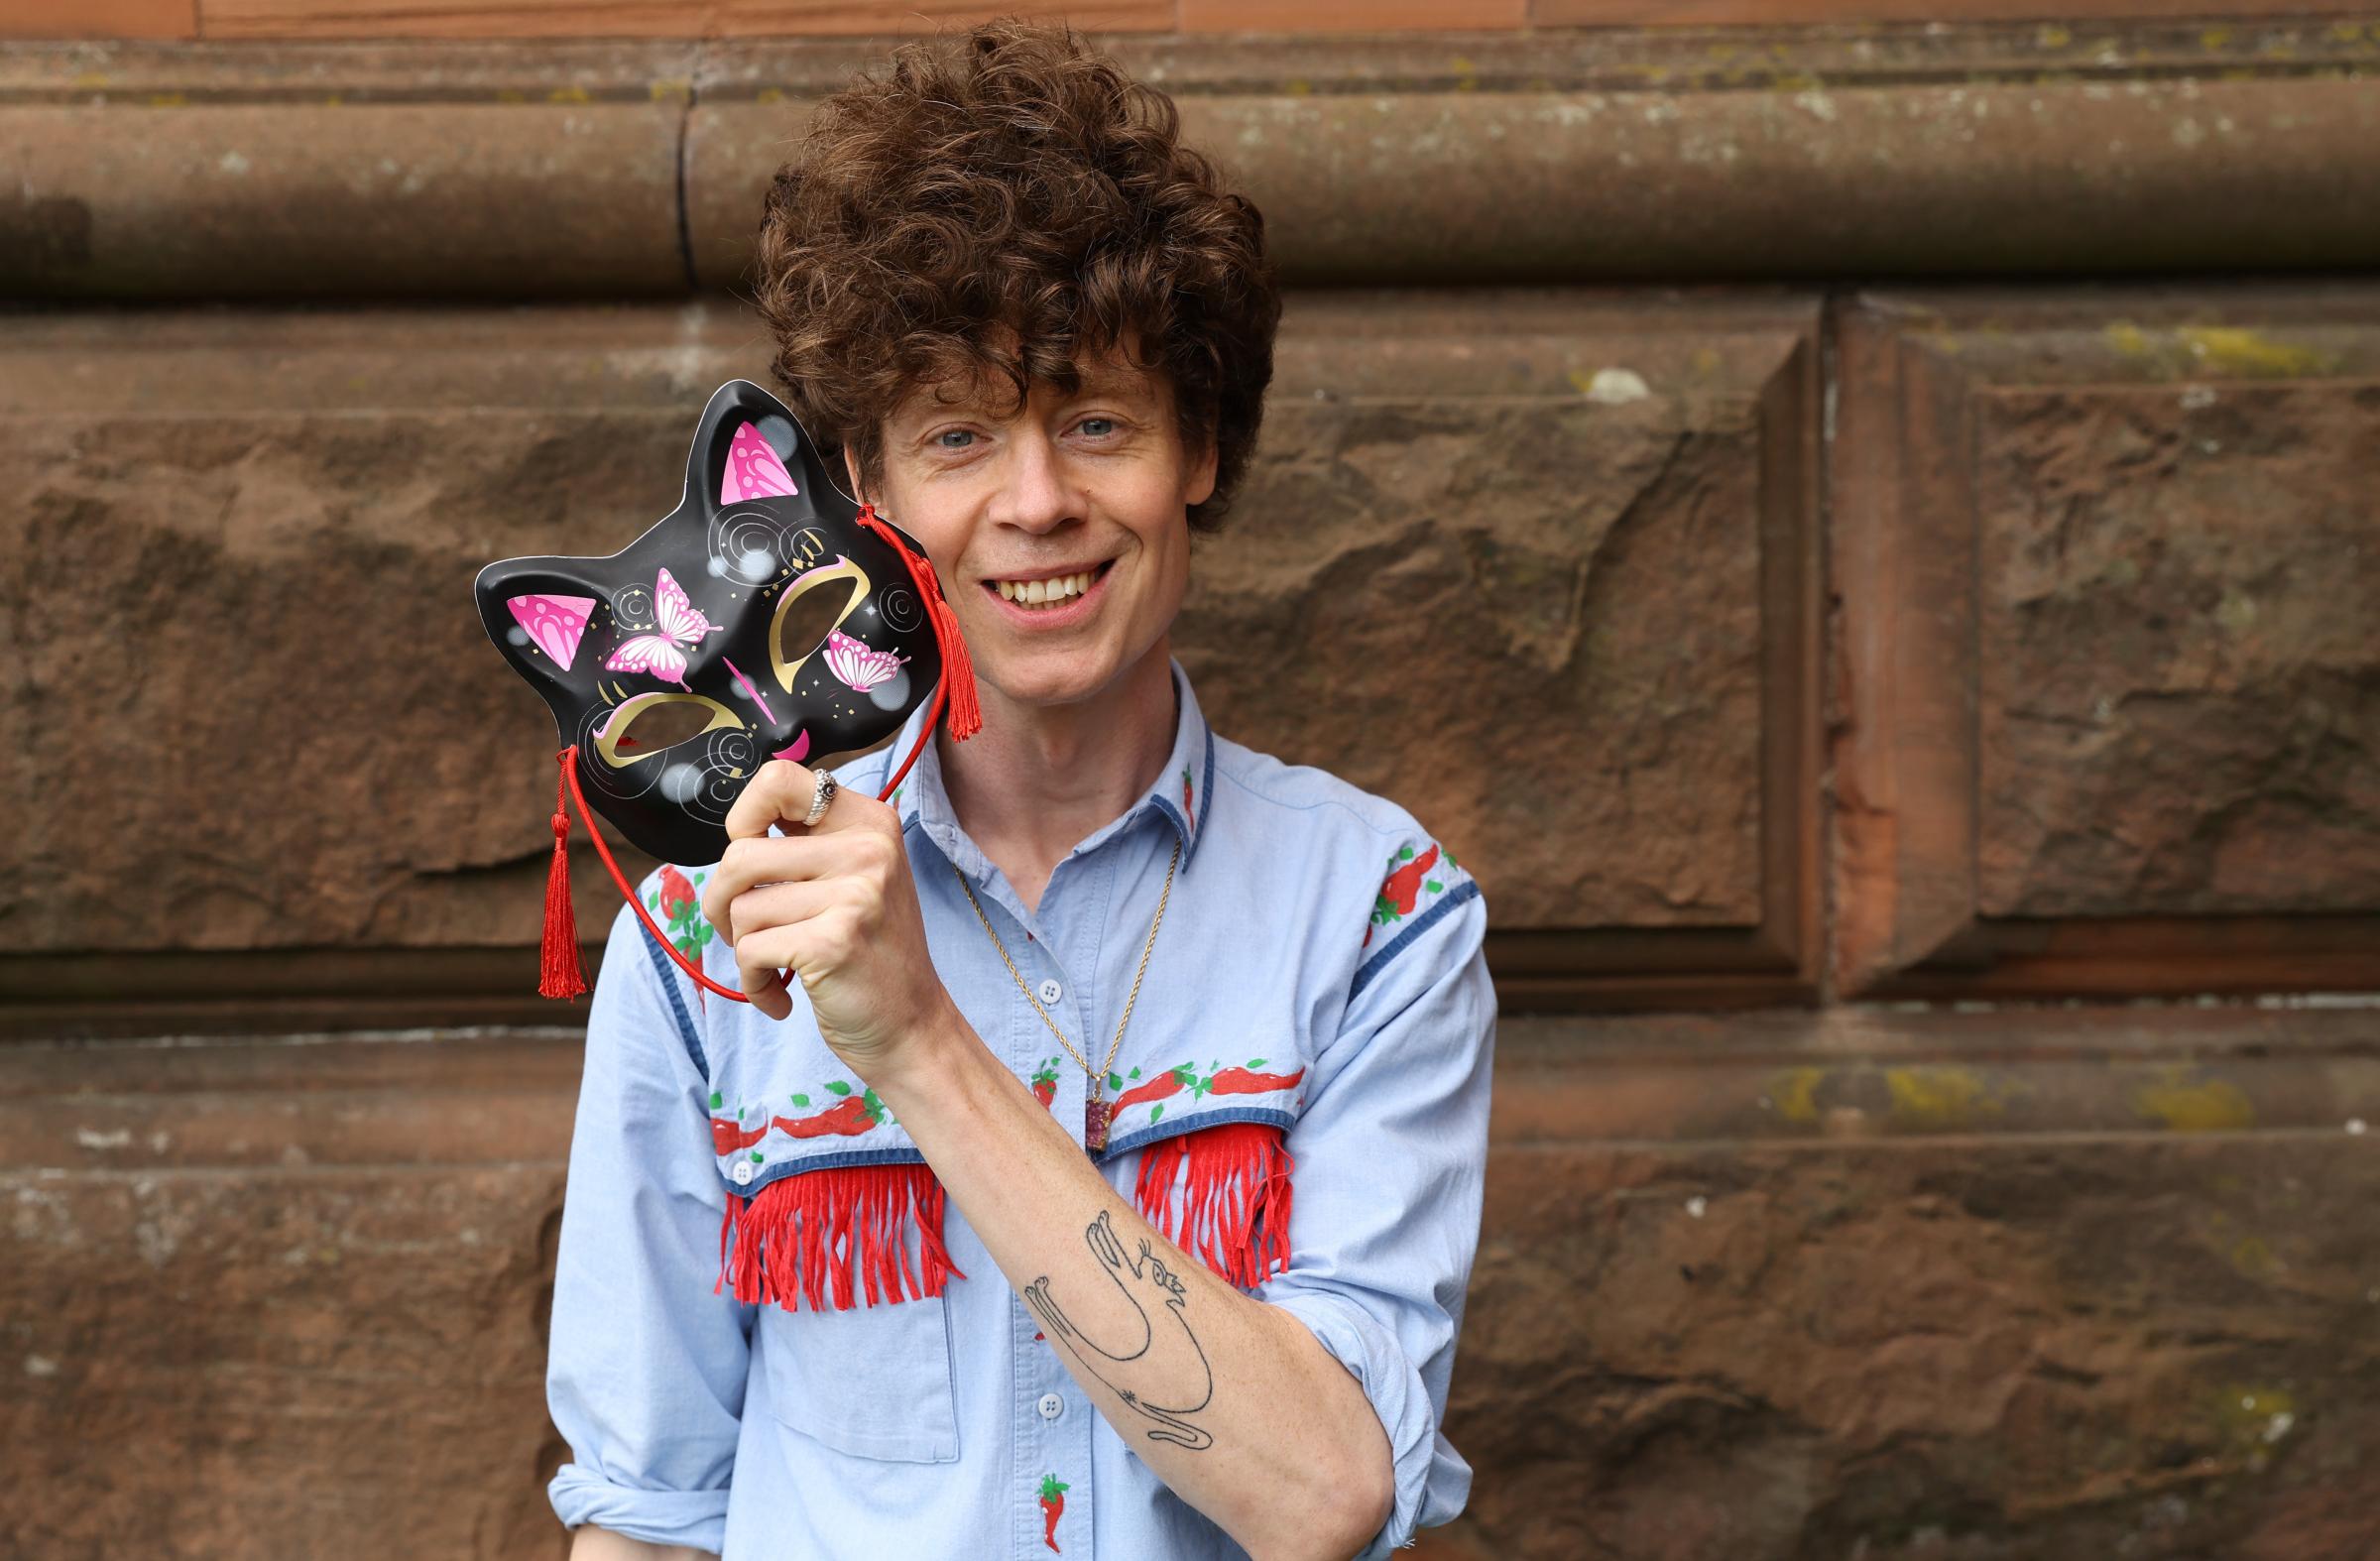 The writer Michael Pedersen pictured in Glasgow with a cat mask. Michaels collection of poems, The Cat Prince has just been published. The title poem from the his new collection of poems, The Cat Prince is about metamorphosing into a cat. Michael